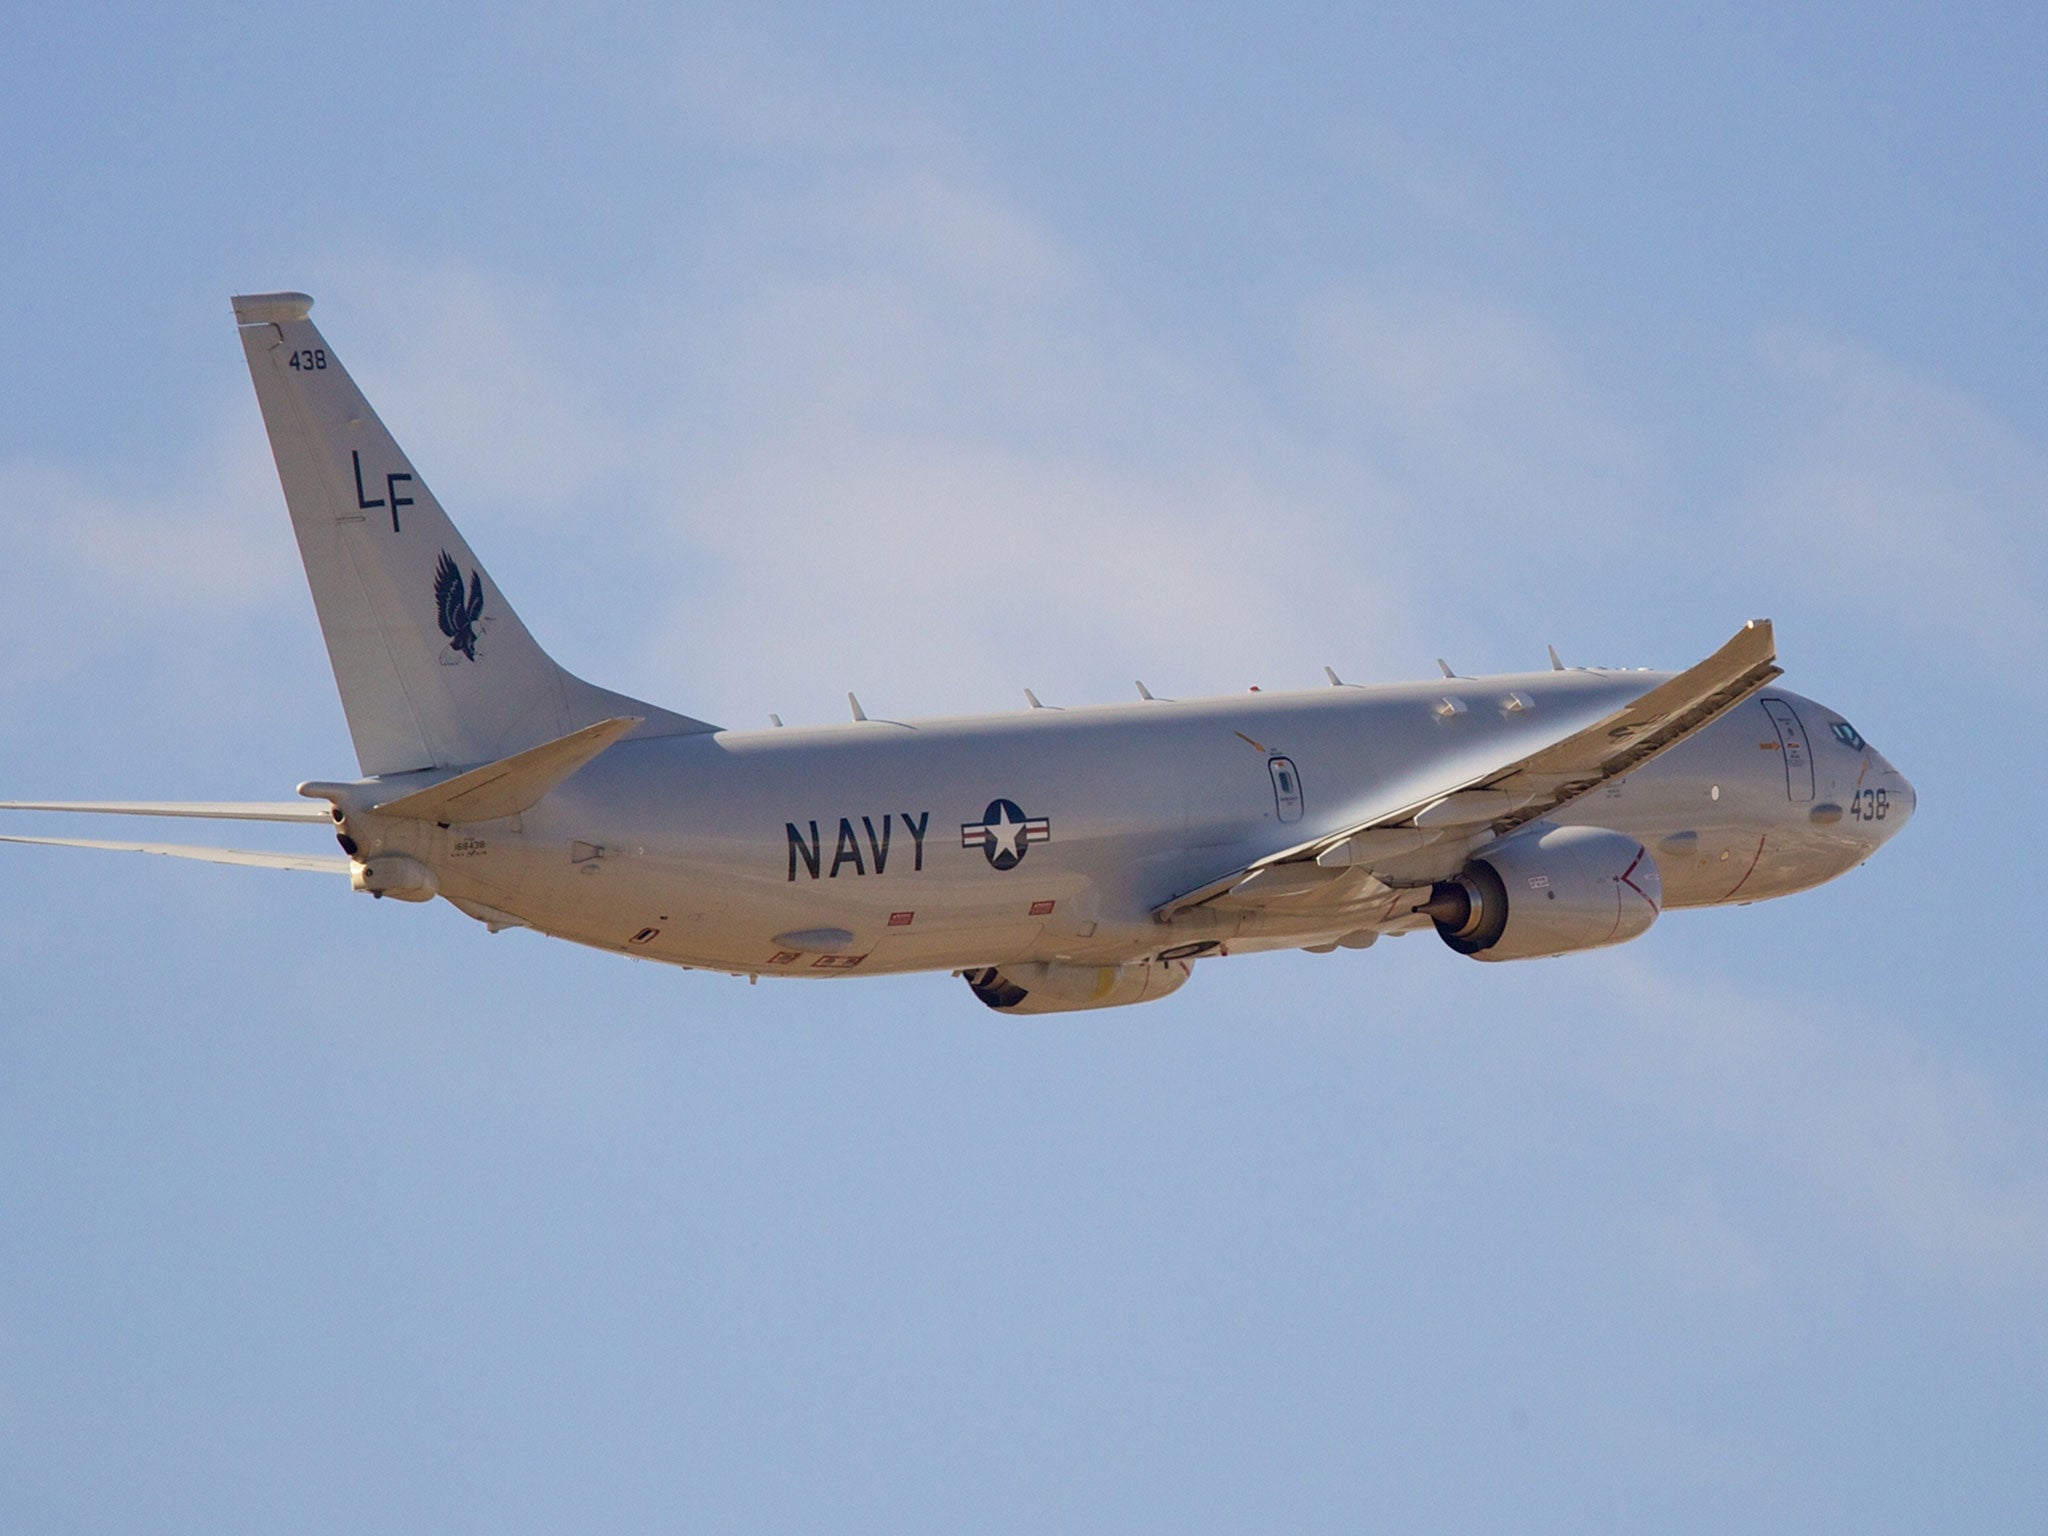 The US said its P-8 Poseidon plane was carrying out a routine flight over the Black Sea